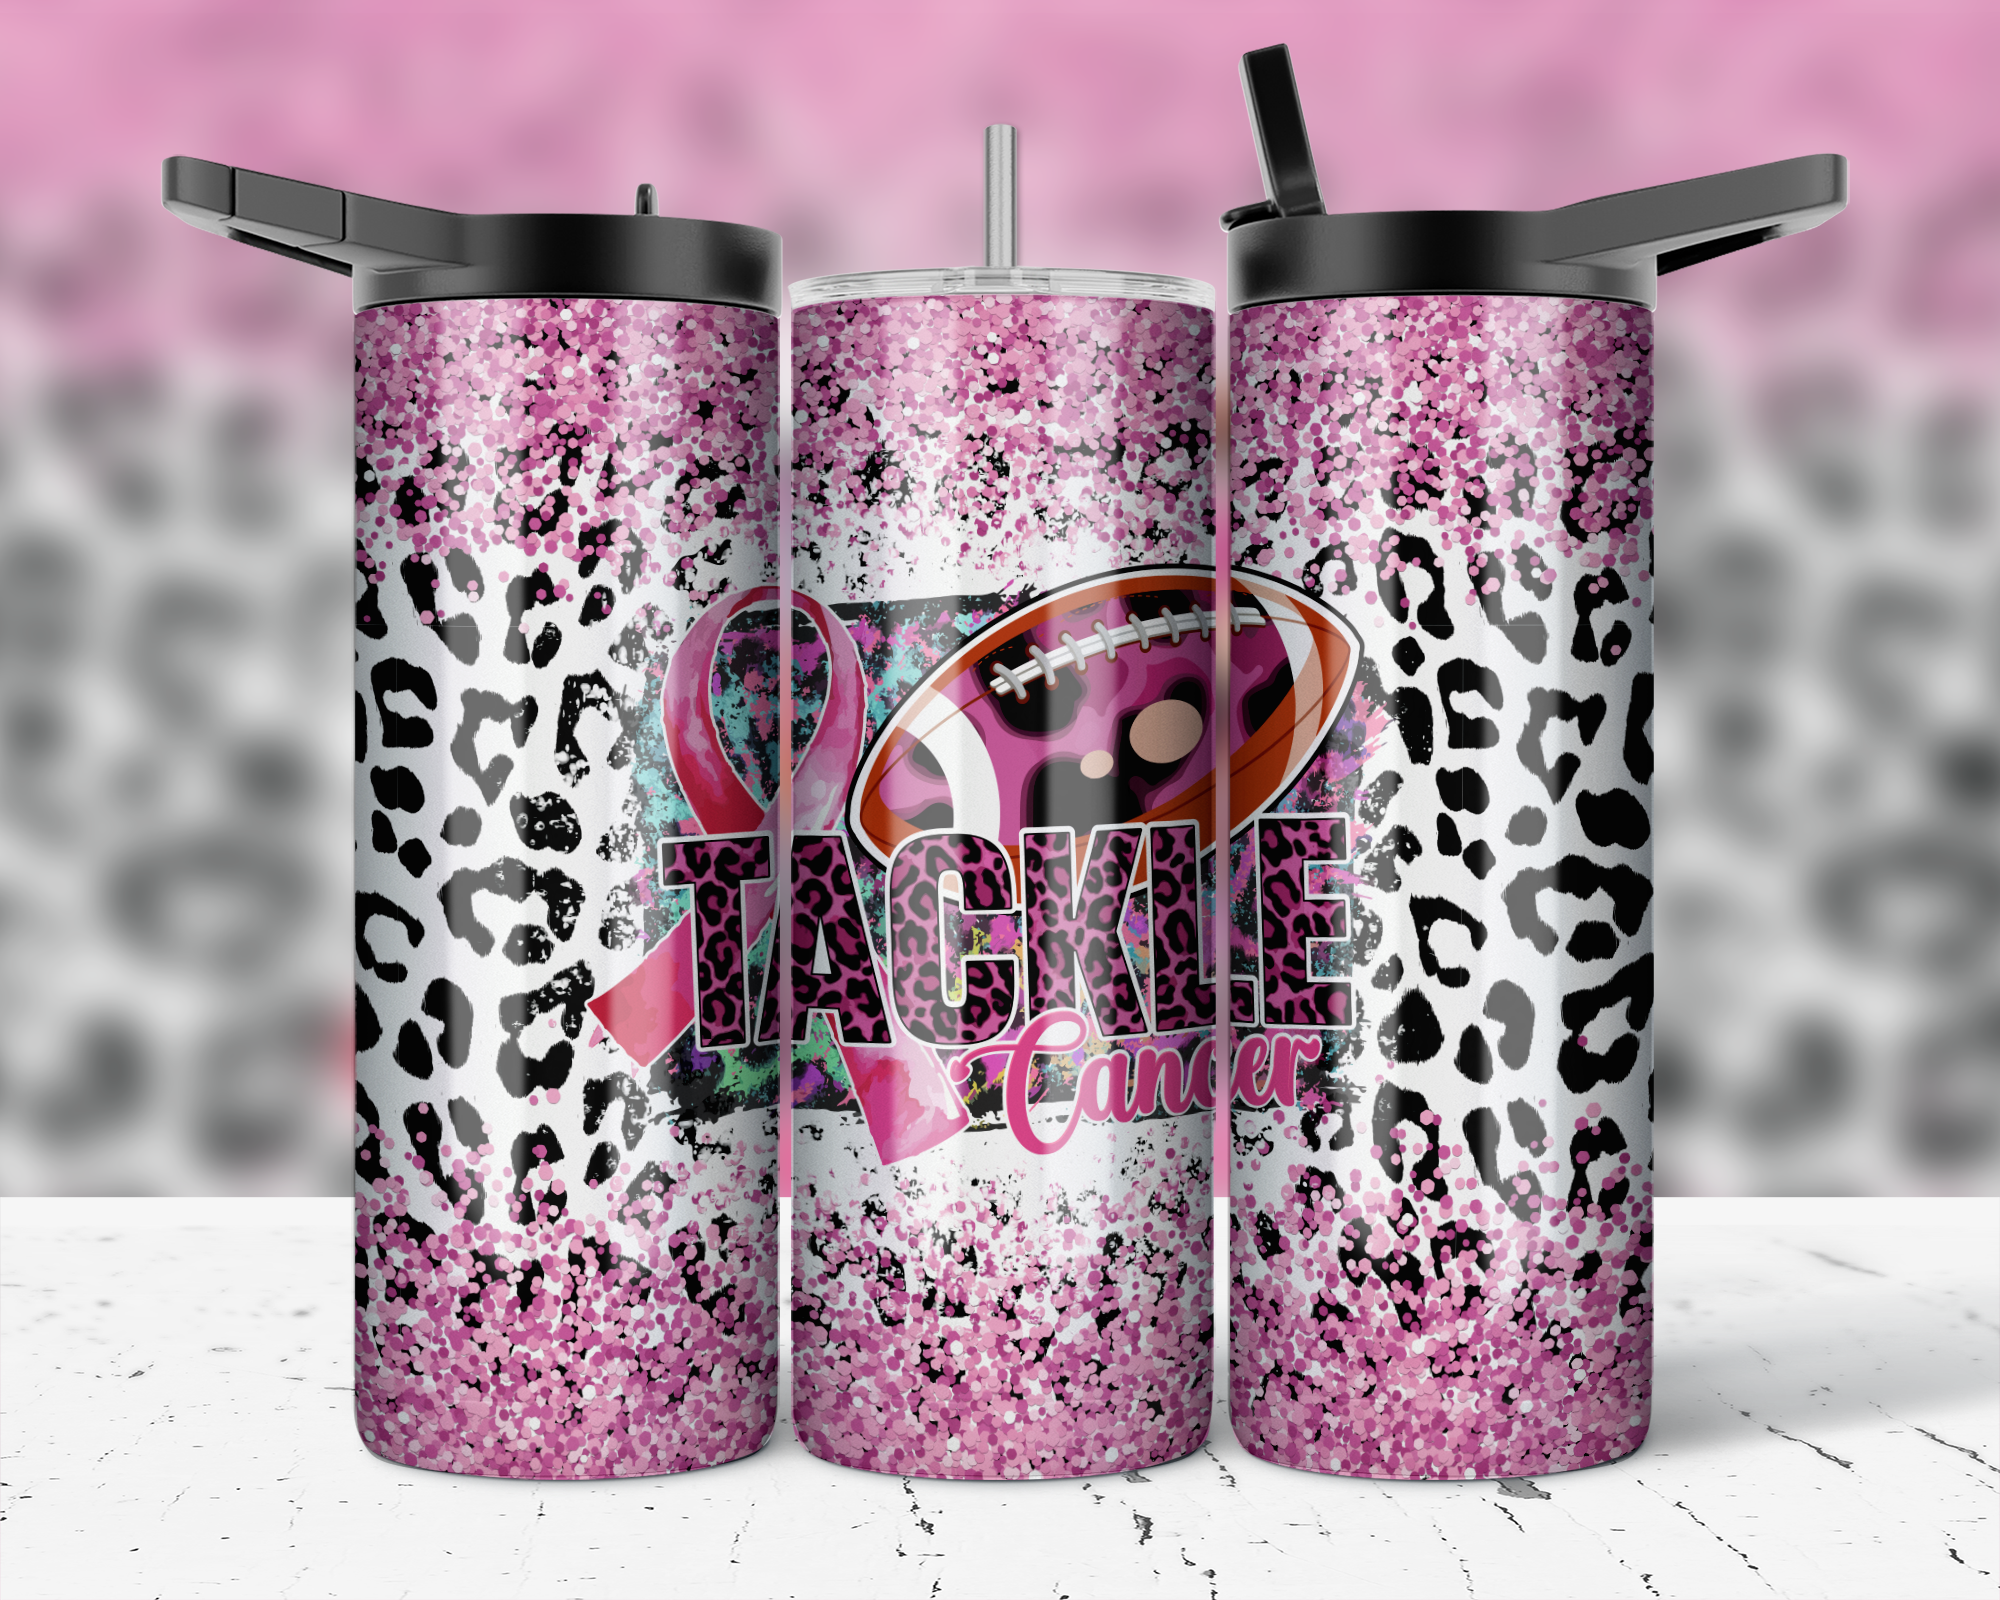 Not Today Succa Sublimation Tumbler